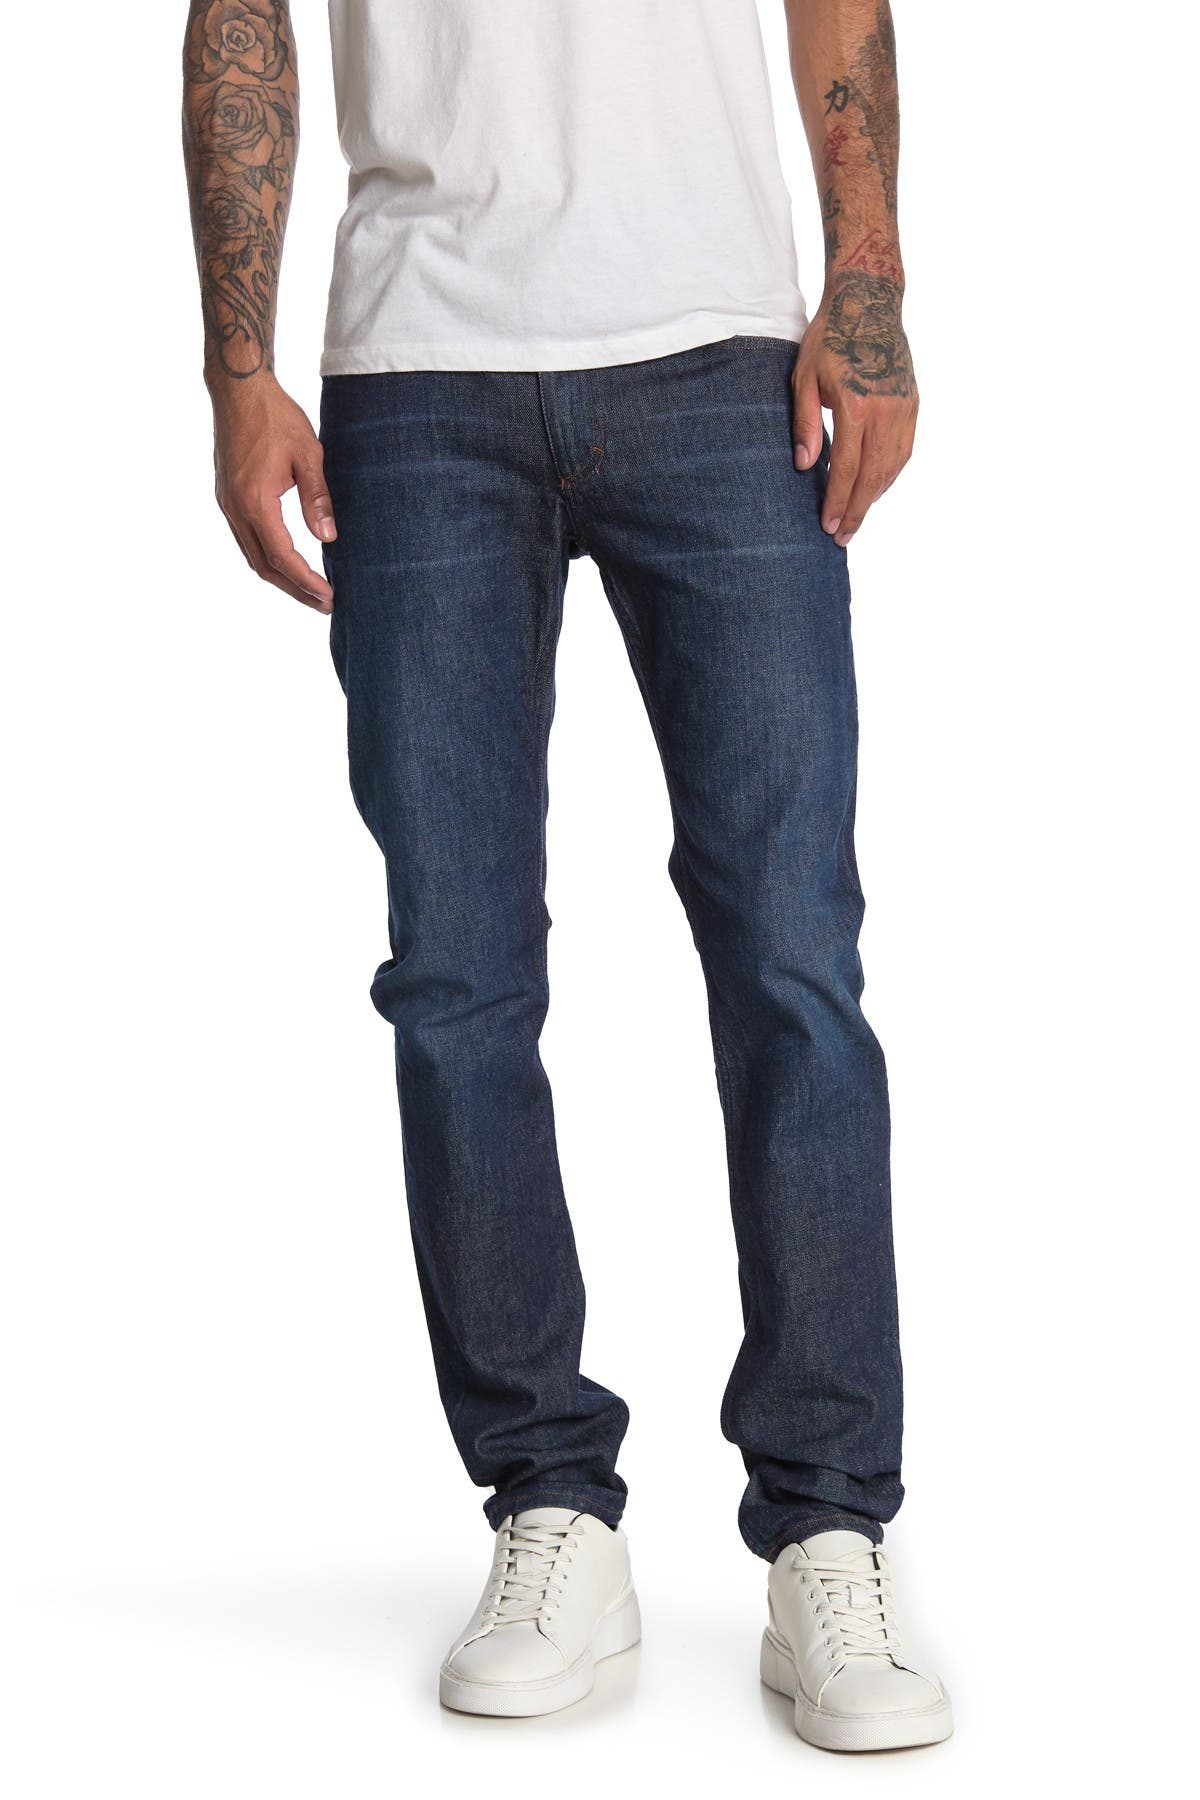 Closed Unity Slim Fit Jeans In Navy5